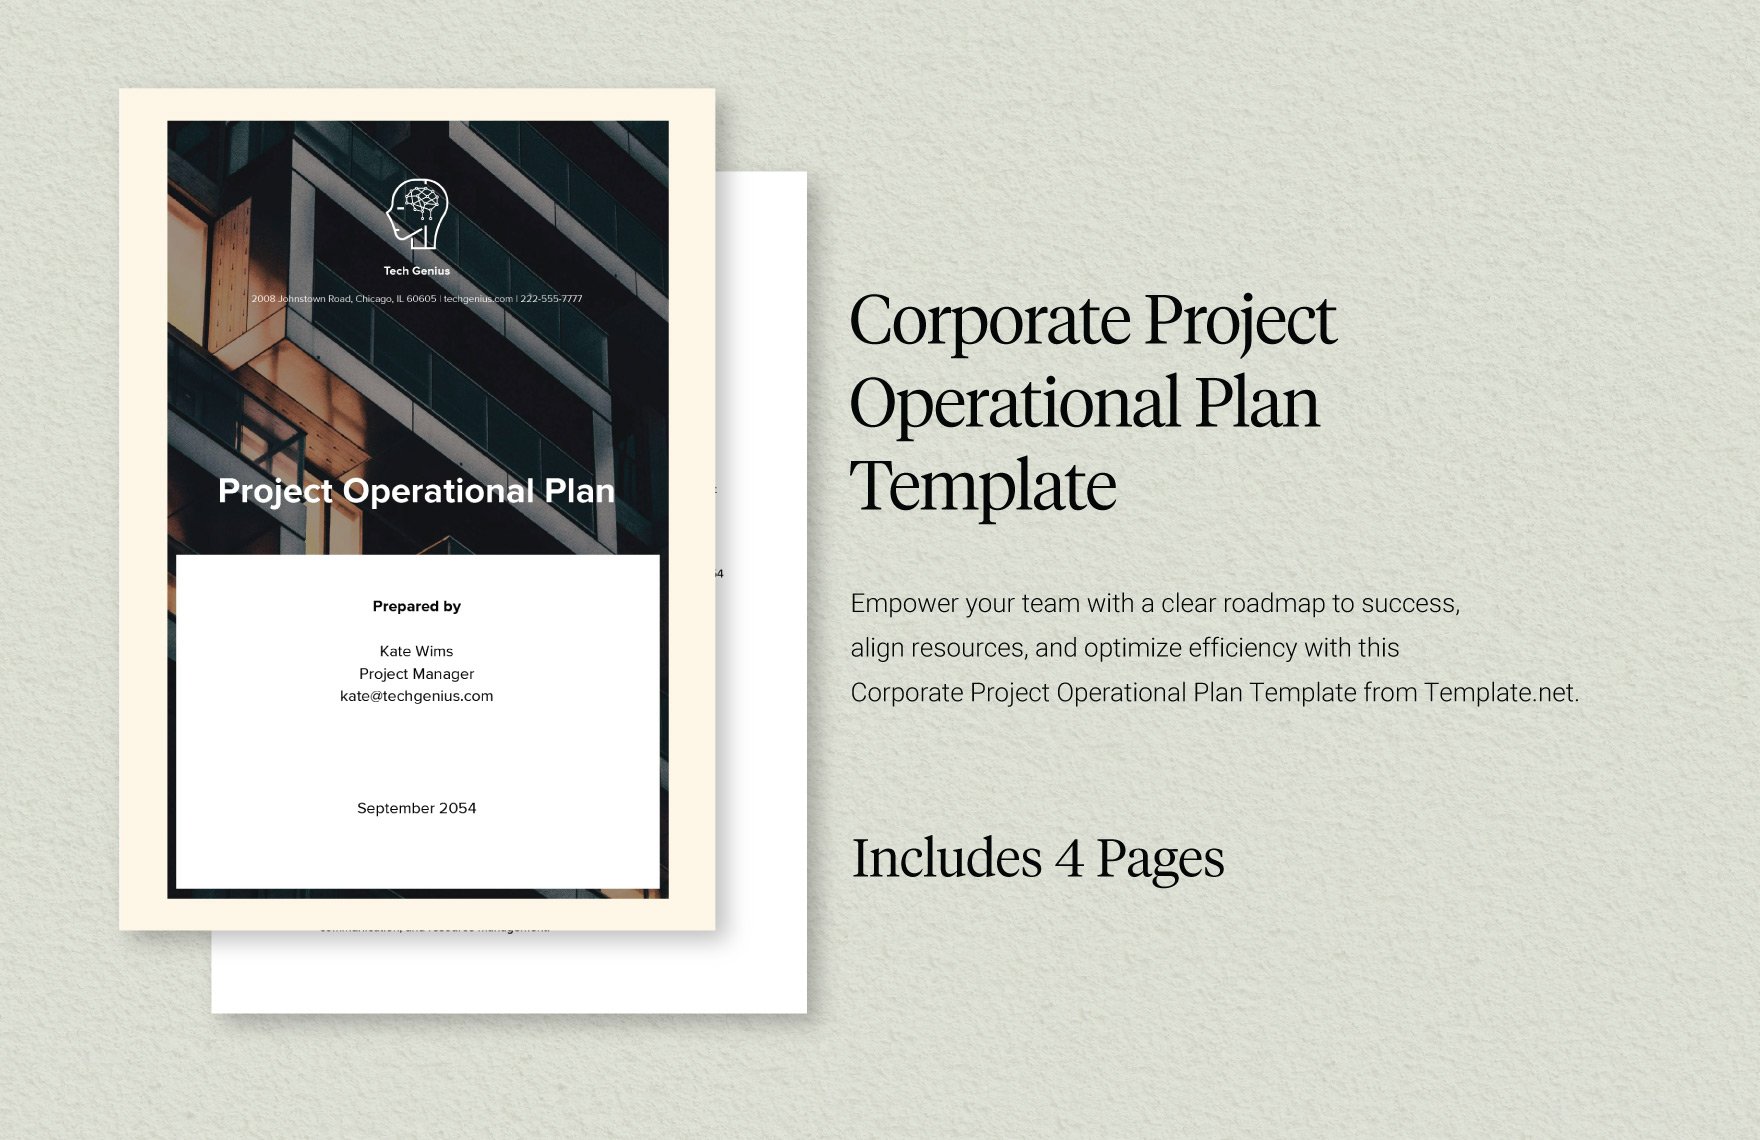 Corporate Project Operational Plan Template